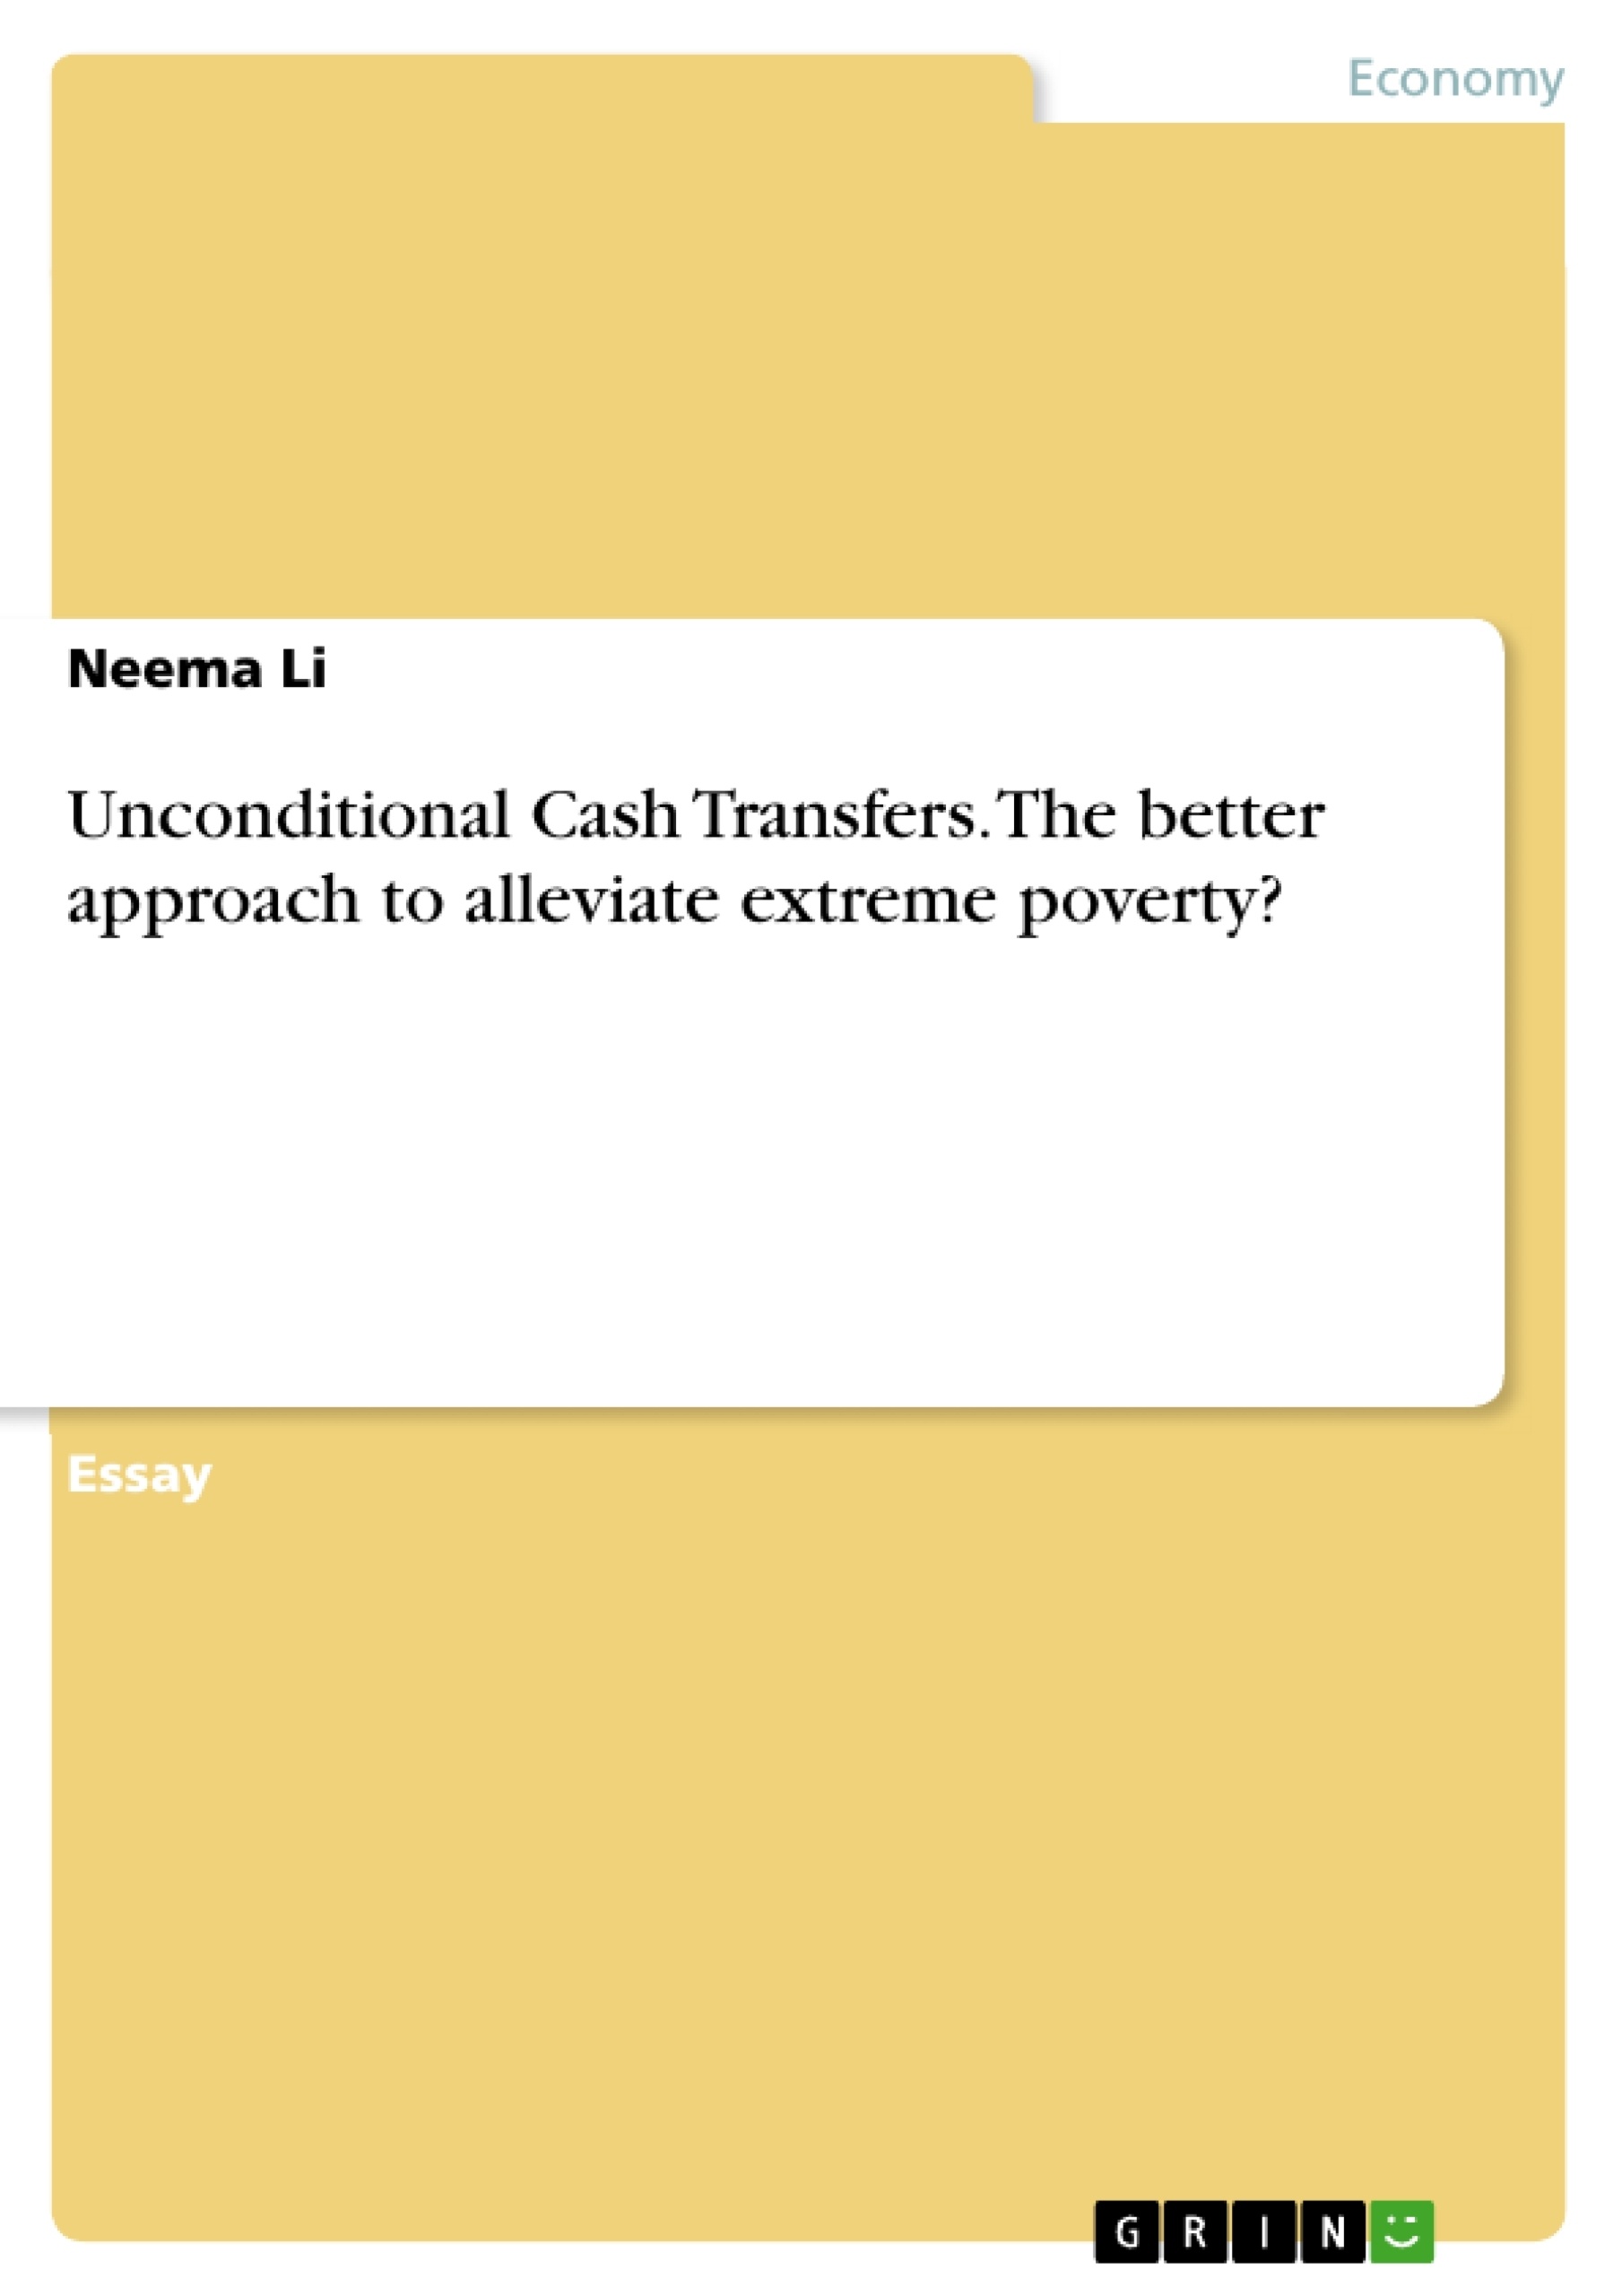 Título: Unconditional Cash Transfers. The better approach to alleviate extreme poverty?